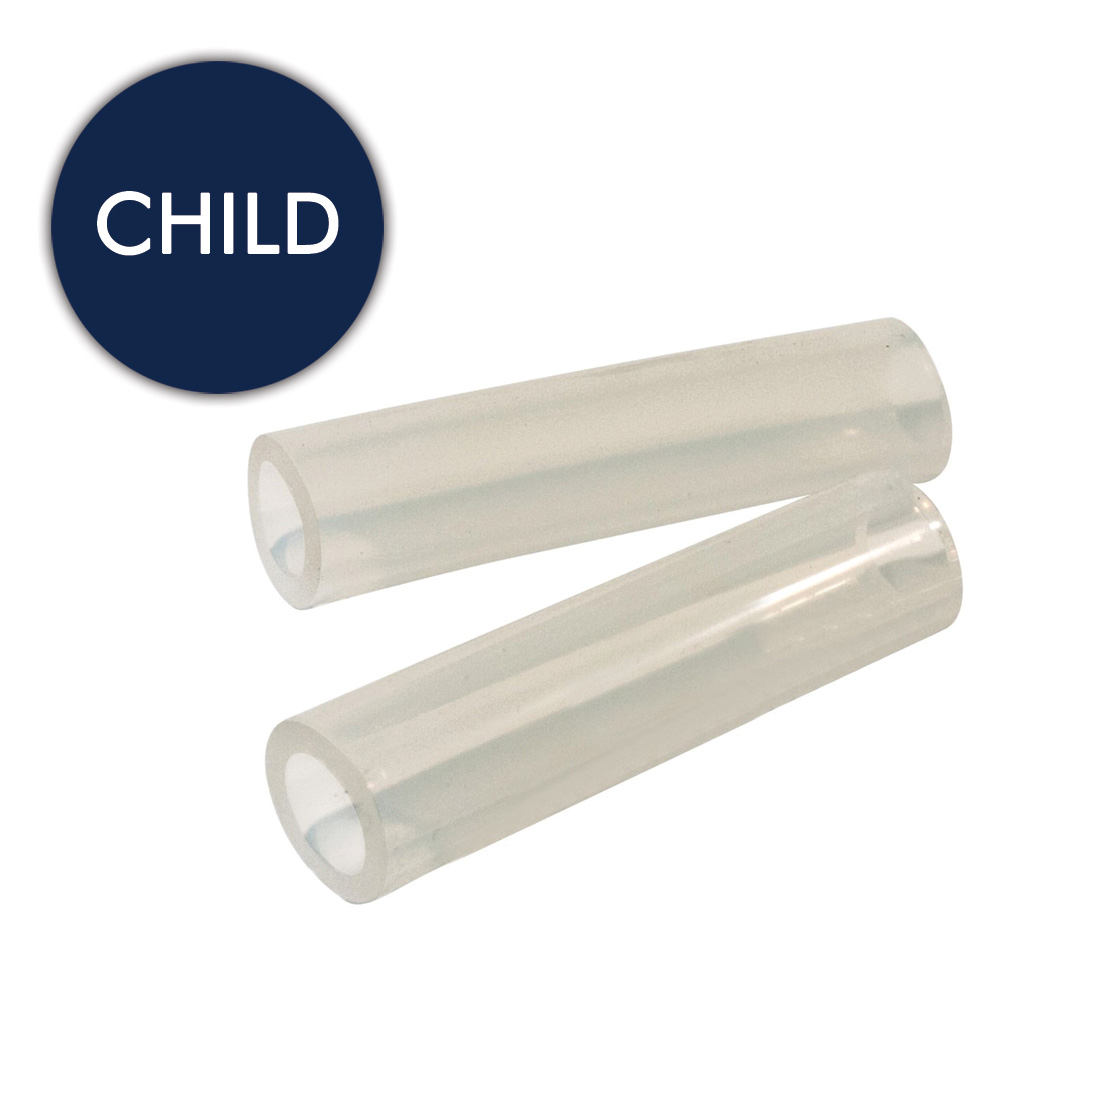 Replacement Silicone Tips For Child Molt Mouth Gag Latex-Free